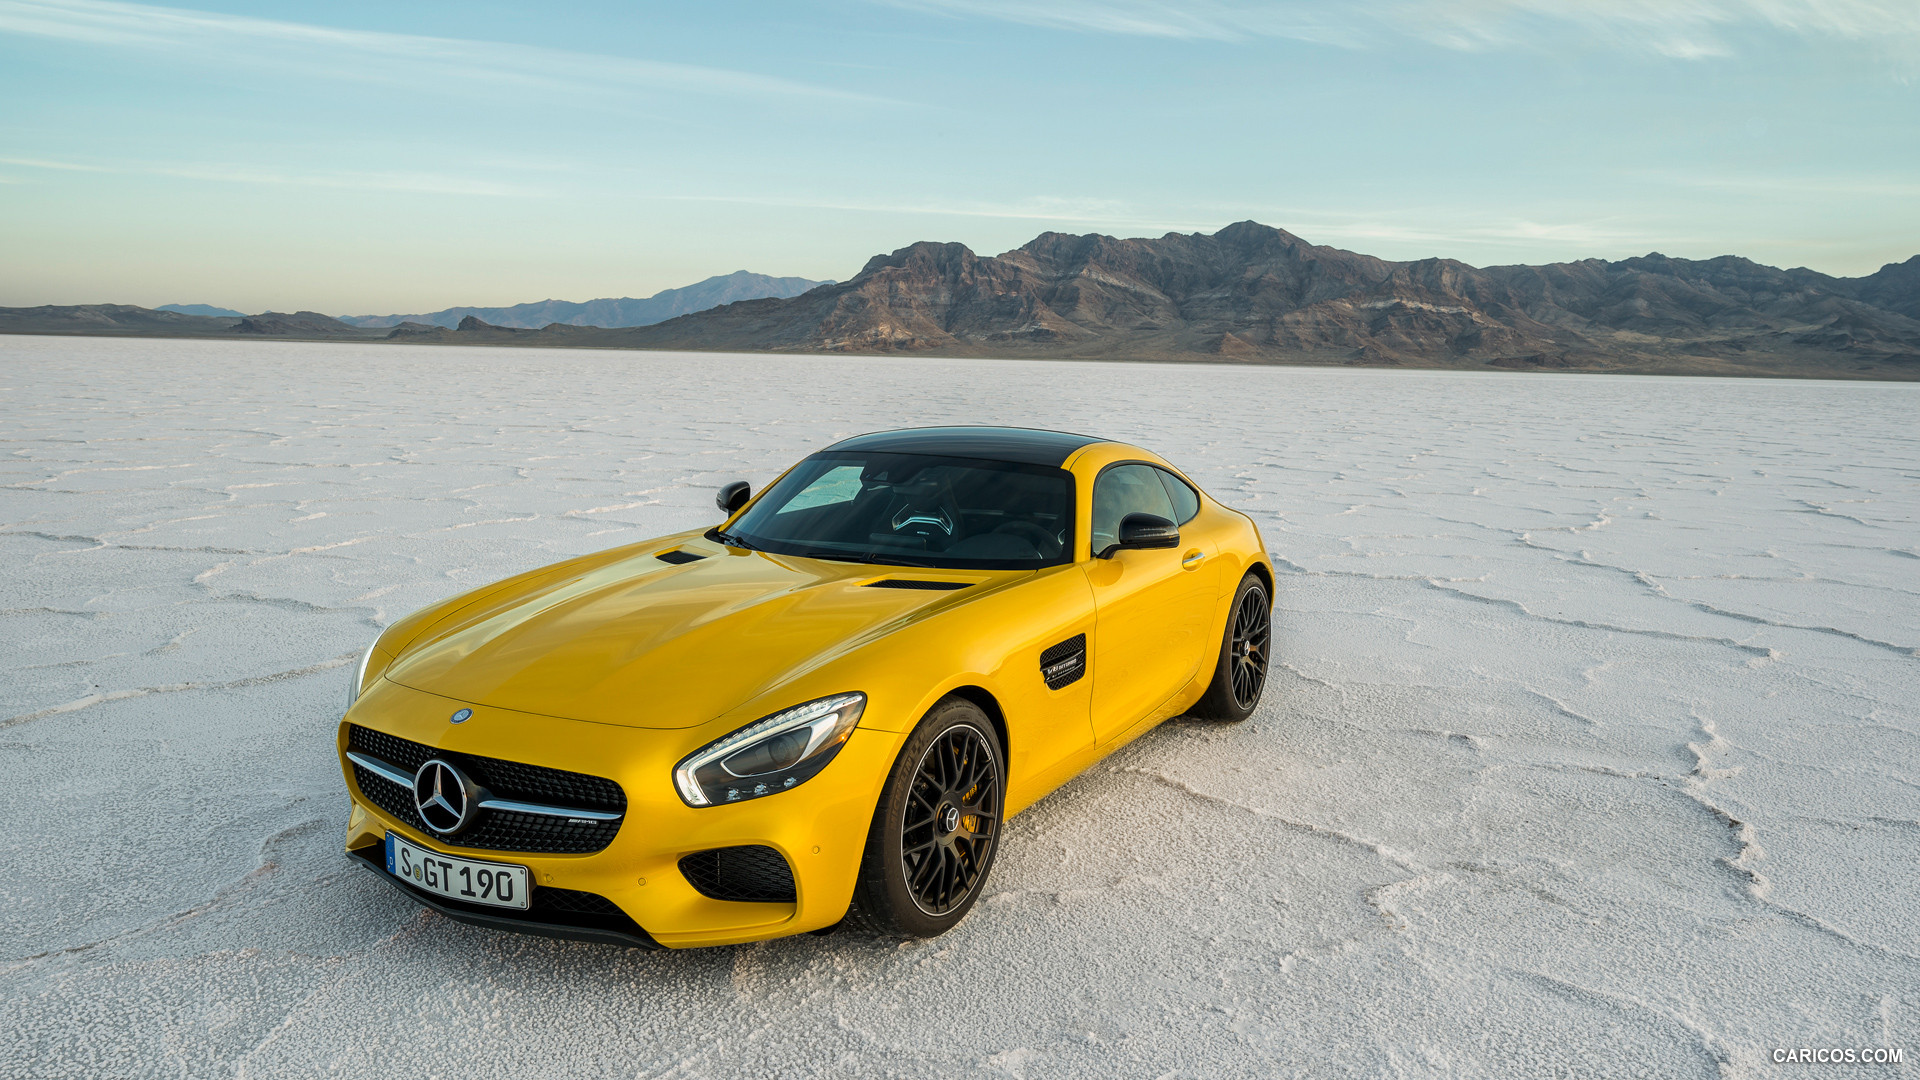 2016 Mercedes-AMG GT (Solarbeam) - Front, #63 of 190